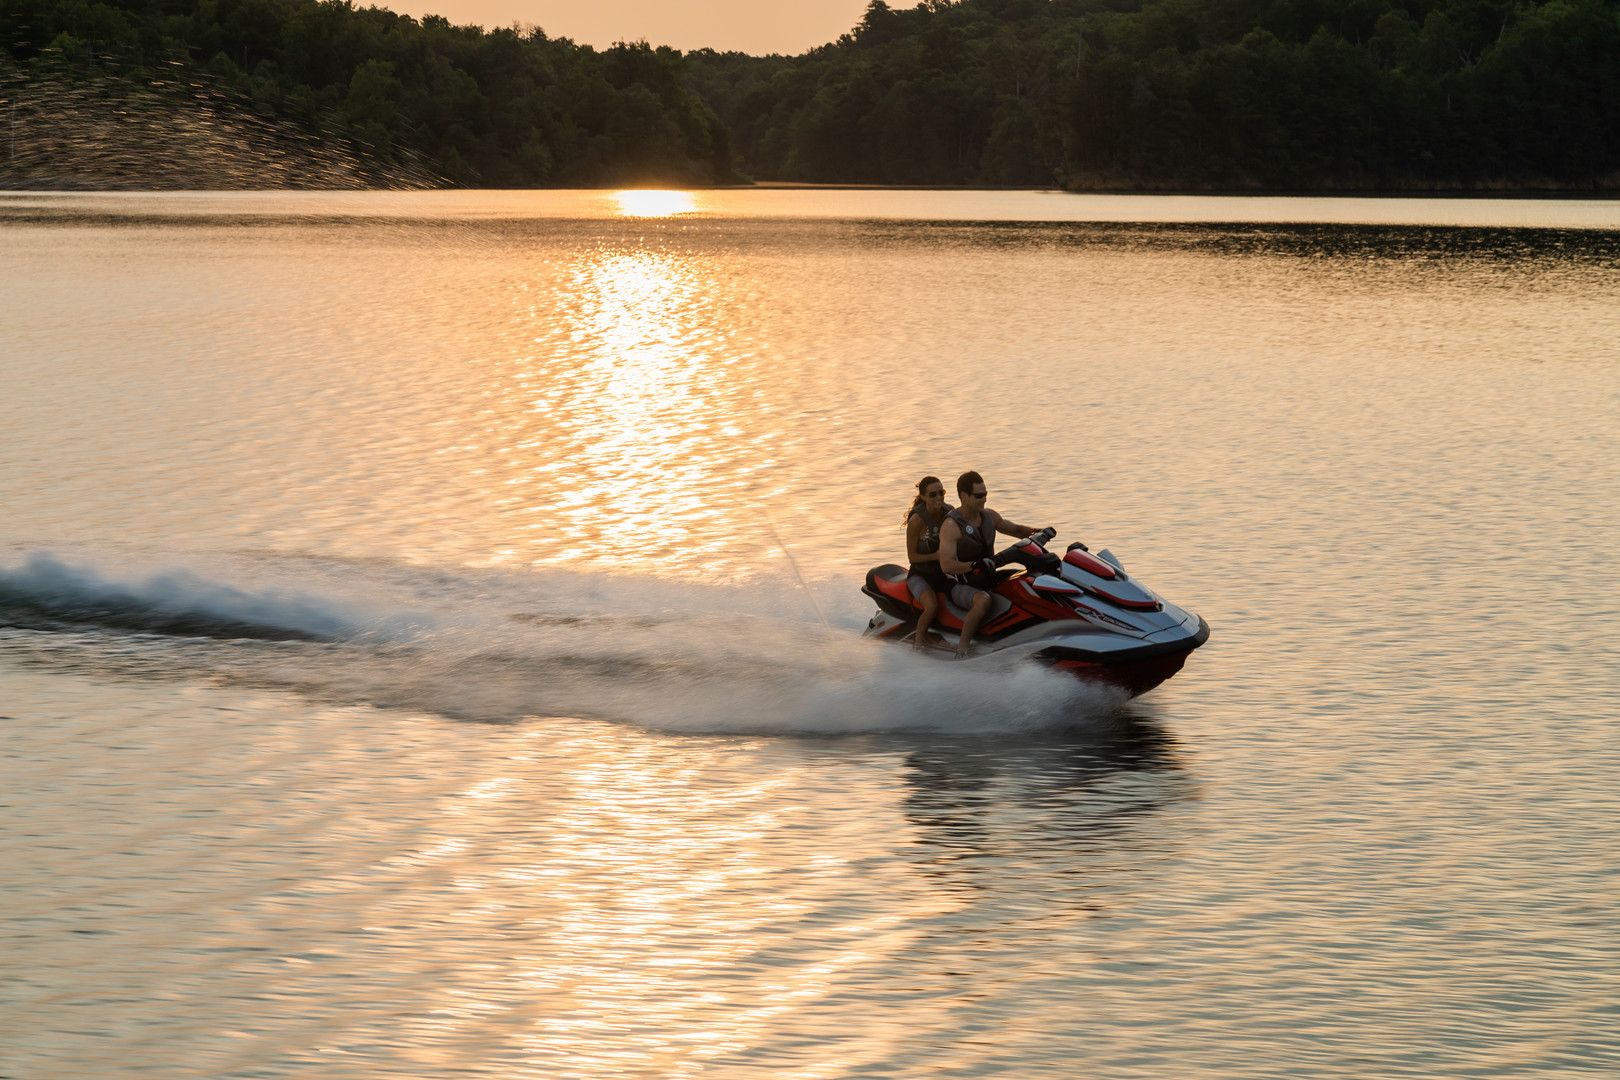 Welcome To The All-New Yamaha 2021 Waverunner Lineup